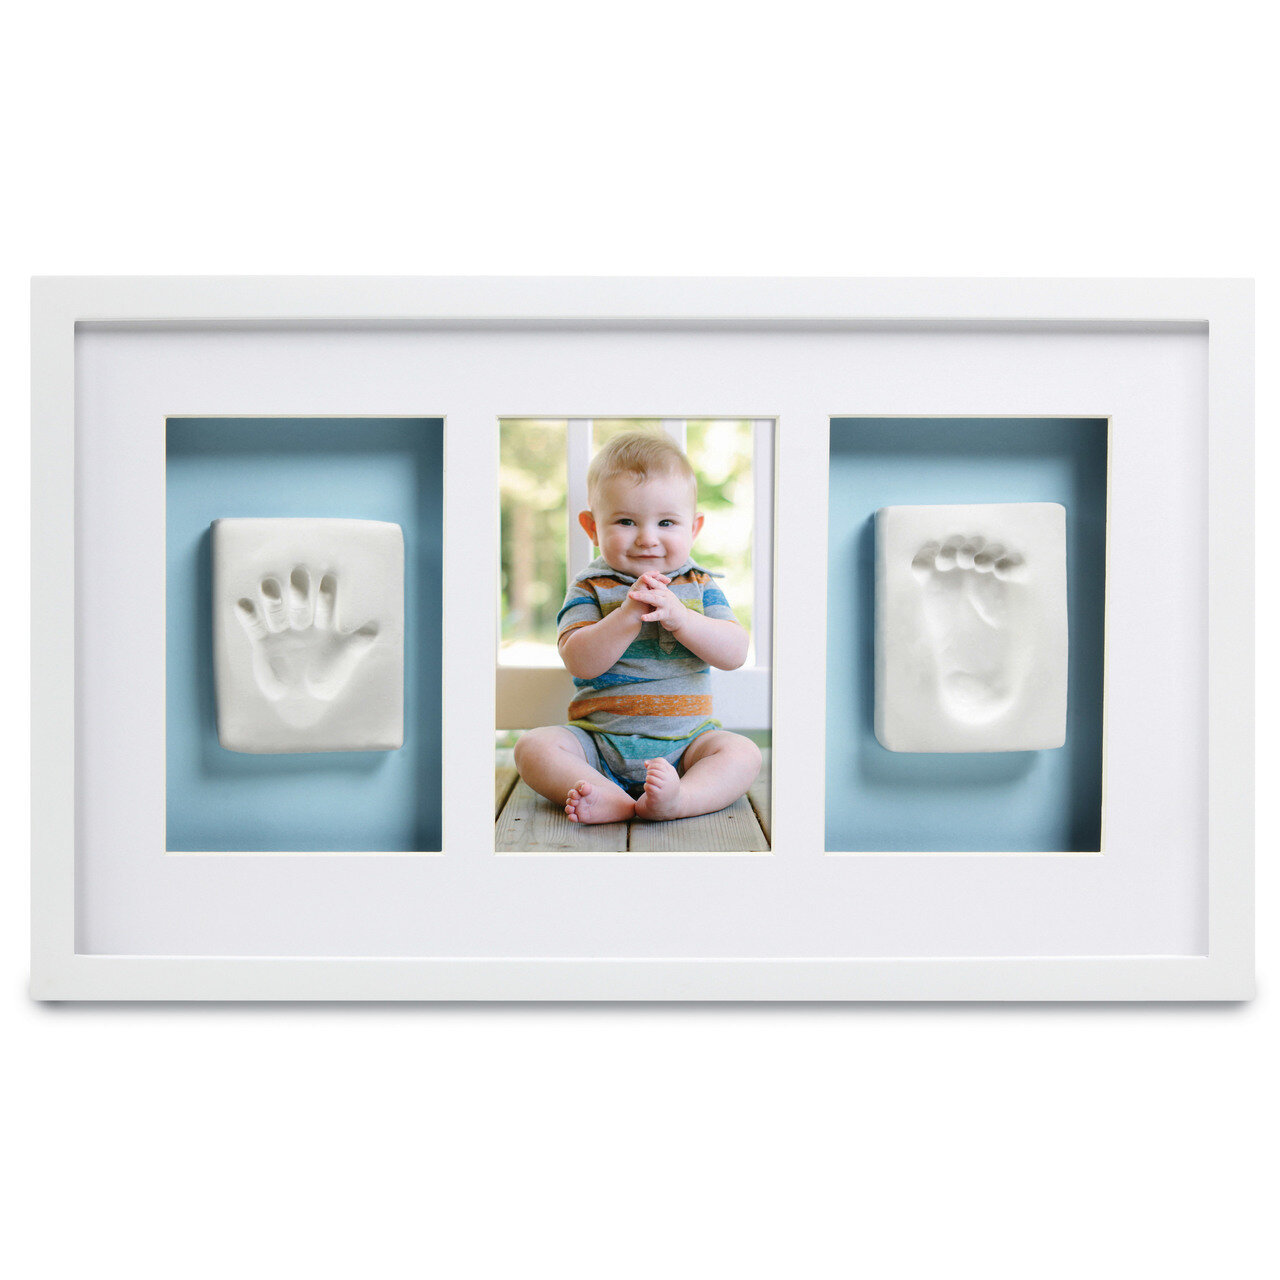 White Babyprints Deluxe Wall Picture Frame GM15712